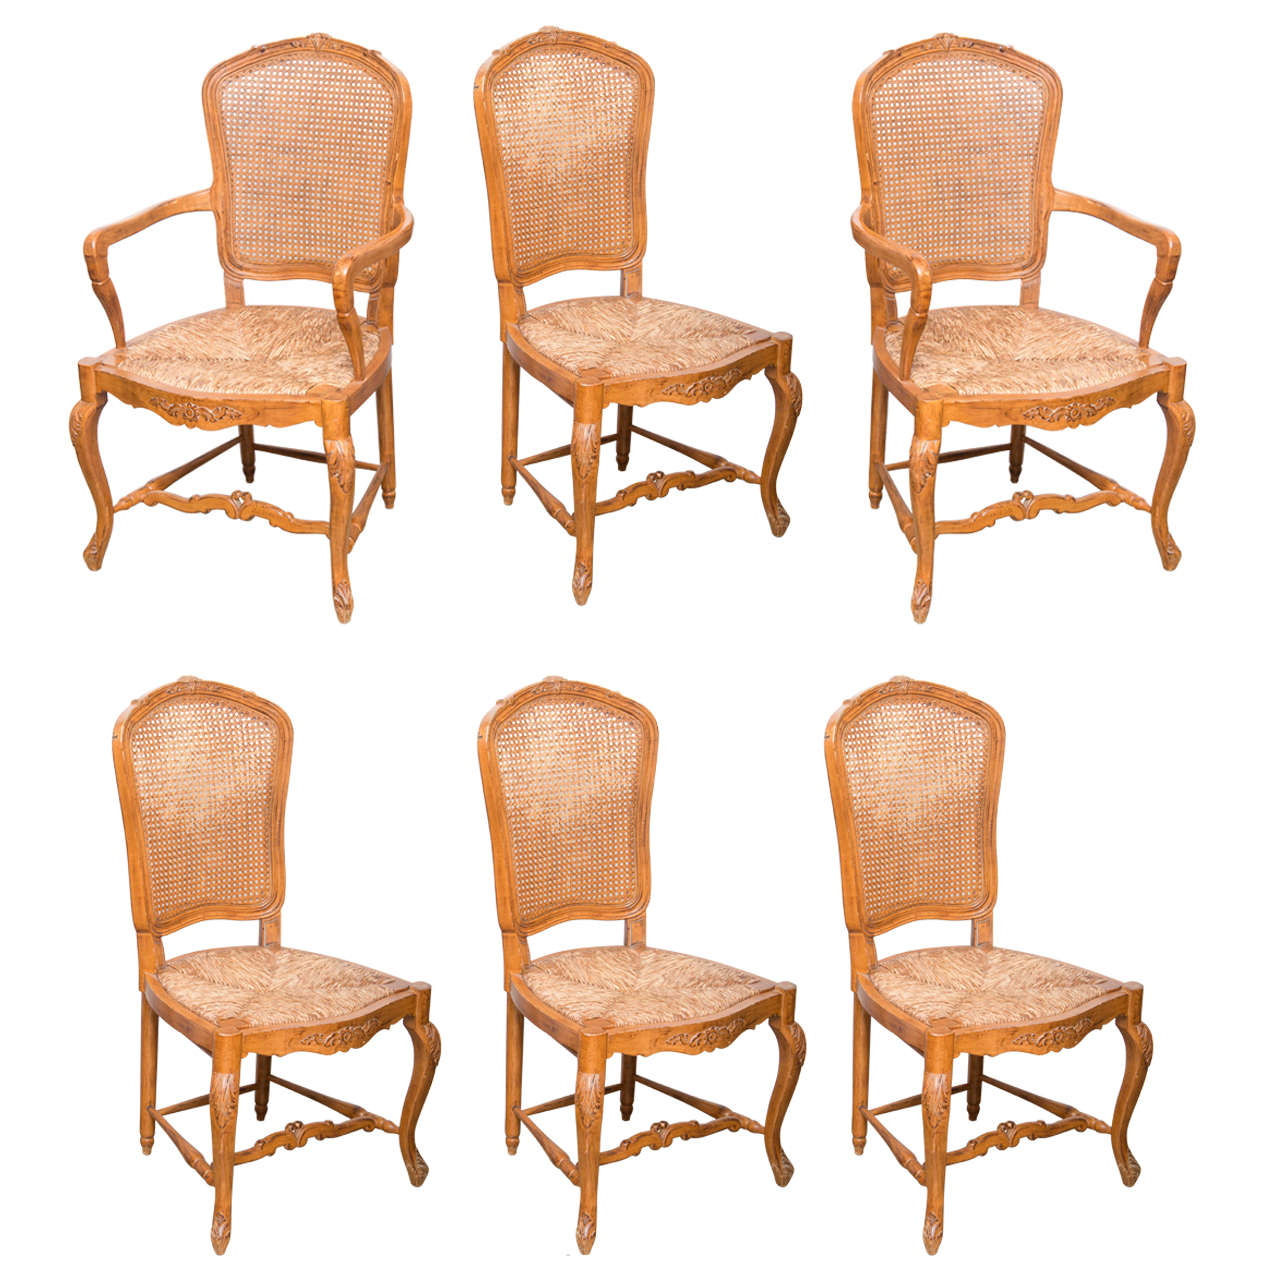 Set of Six French Provençal Chairs, 20th Century